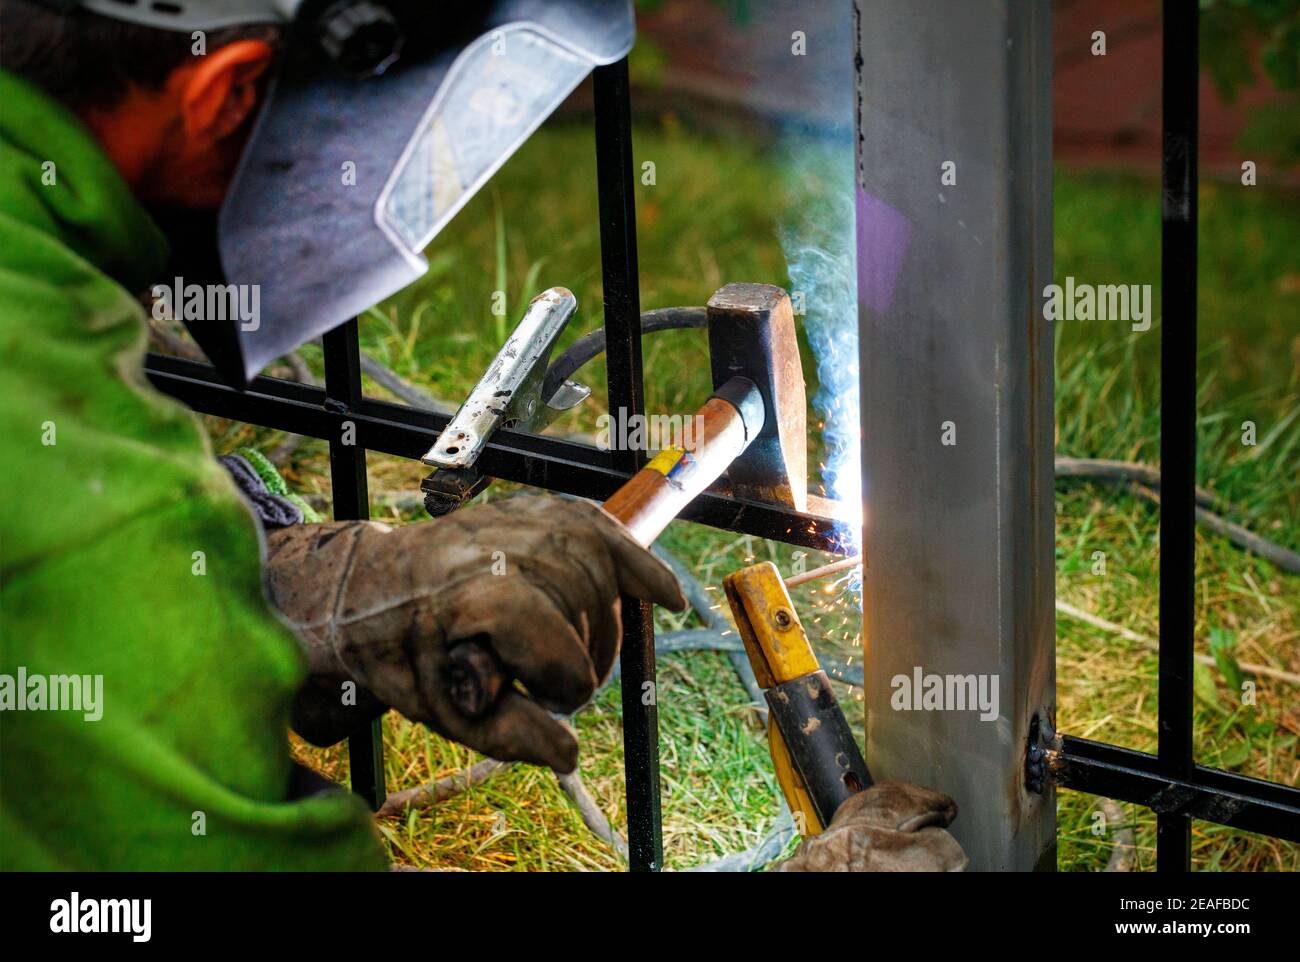 A welder wearing a safety helmet and gloves is welding a metal fence, bright sparks fly, blue smoke, selective focus, copy space. Stock Photo